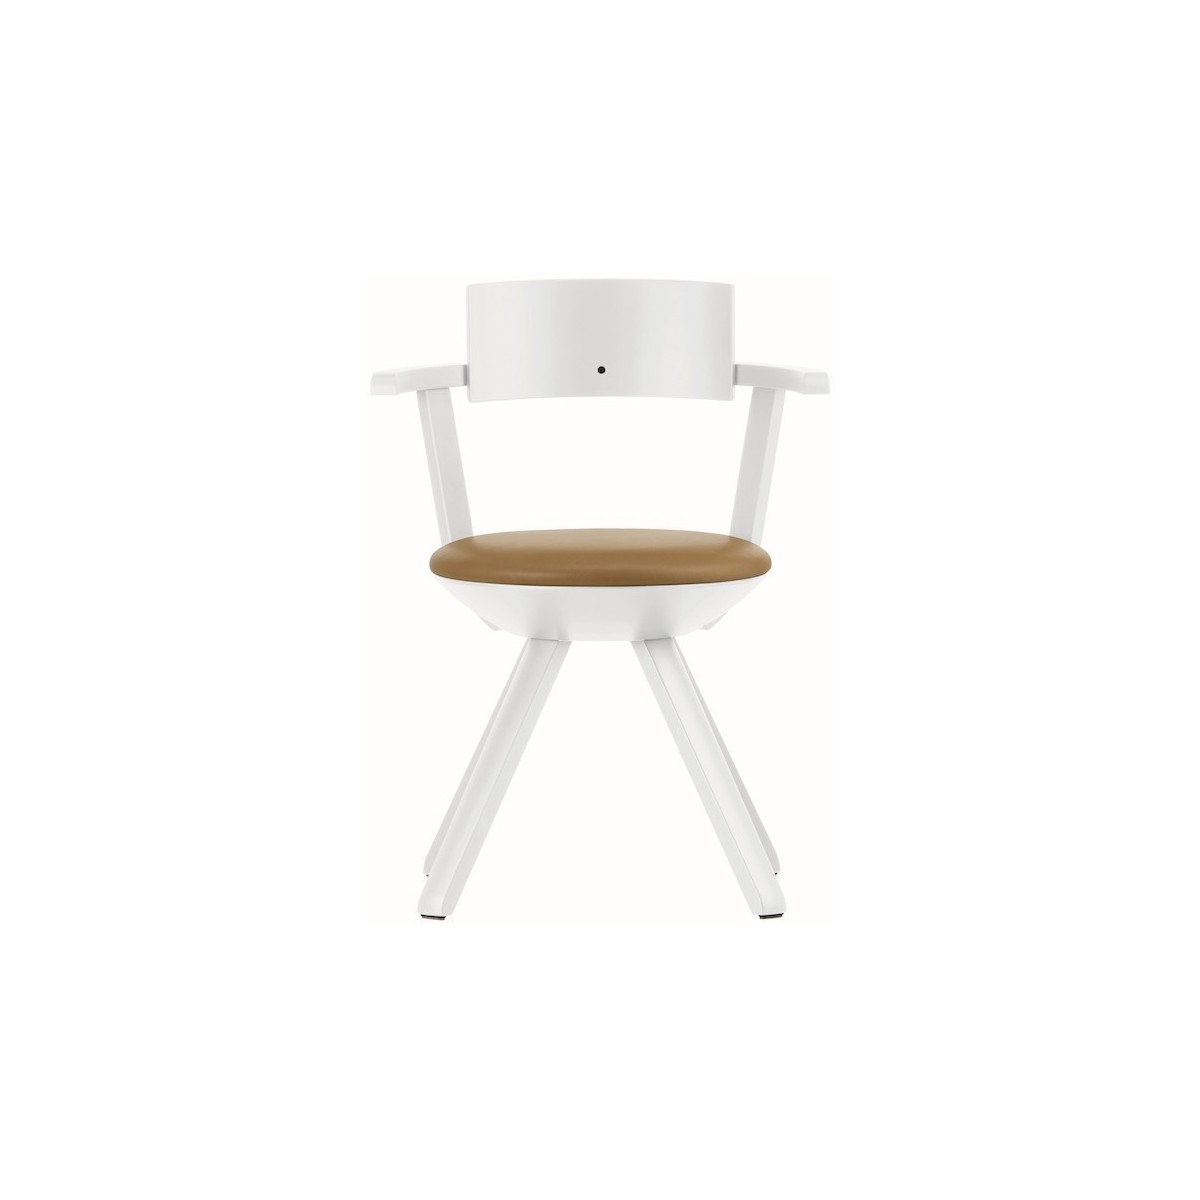 KG002 - caramel leather + white - Rival chair